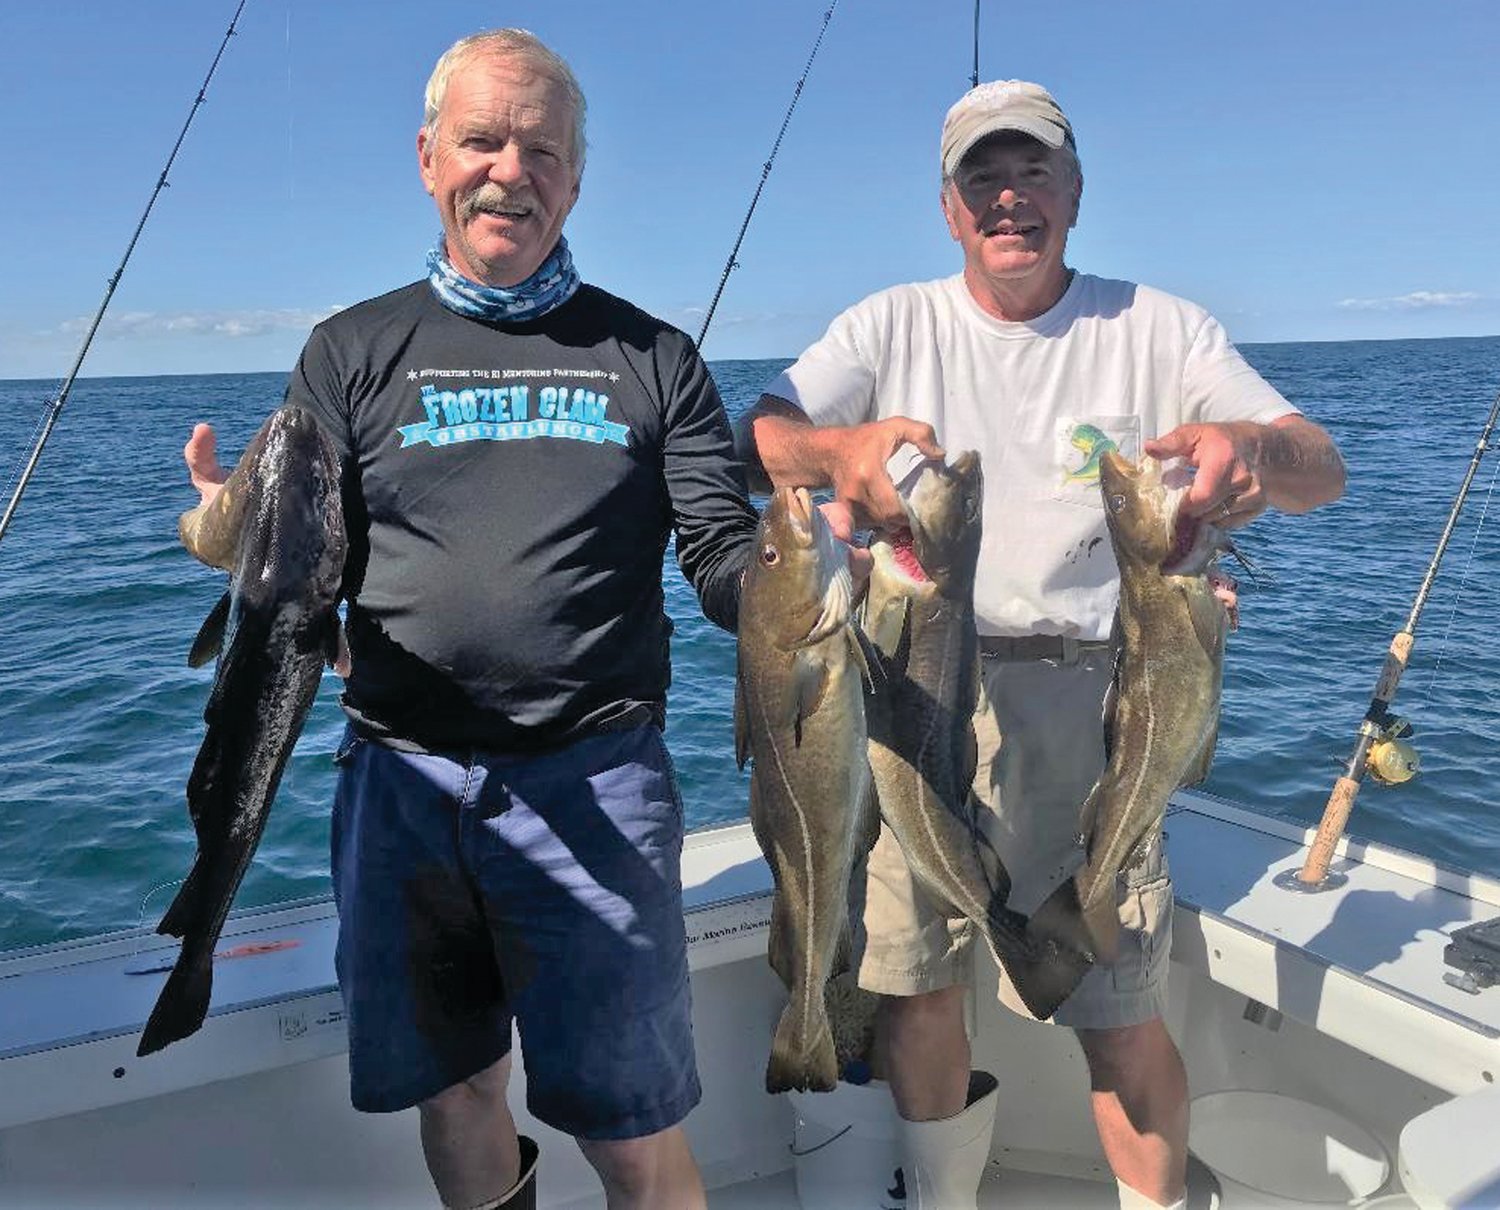 RIGS AND JIGS SEMINAR: Captain Rich Hittinger and Bob Murray, owners of the fishing vessel Skipjack, will give a seminar Monday on how to make or enhance your fishing rigs and jigs. (Submitted photo)